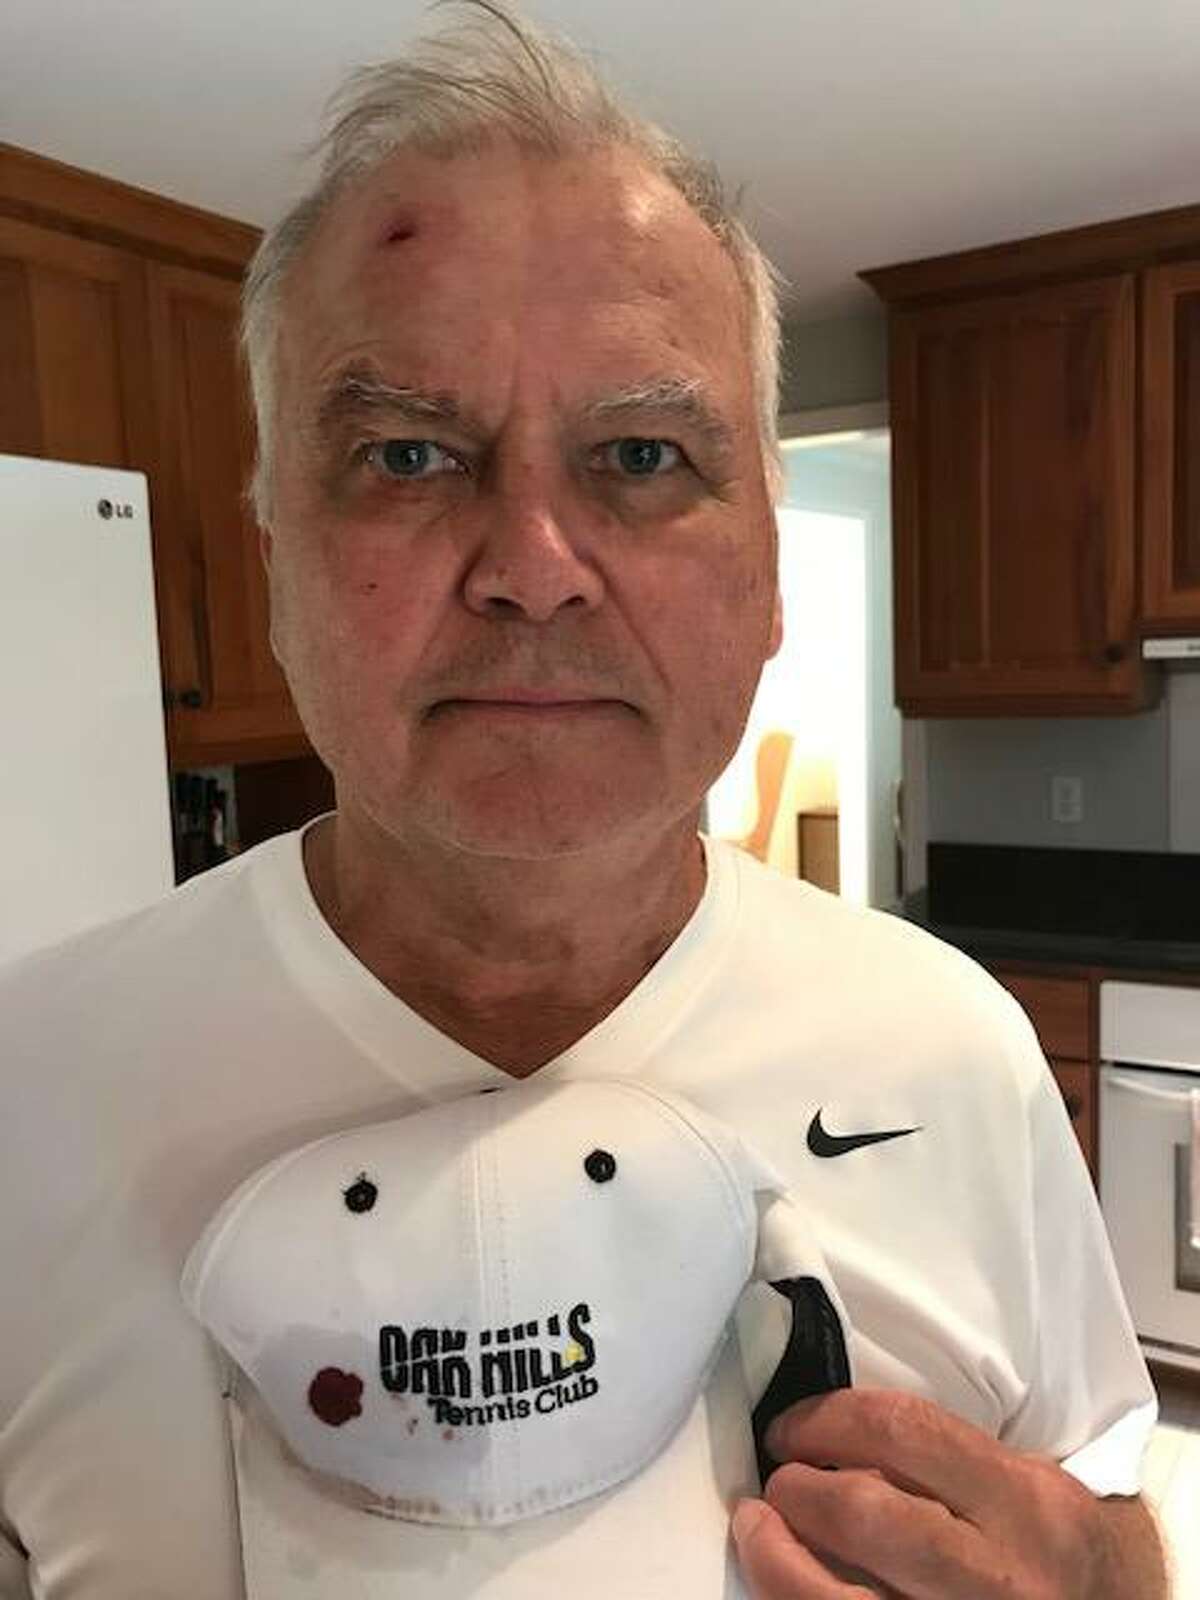 Peter Kryworuczko was struck in the head by a stray golf ball while playing tennis at Oak Hills Park. This photo was taken on the day he was injured in September 2021.